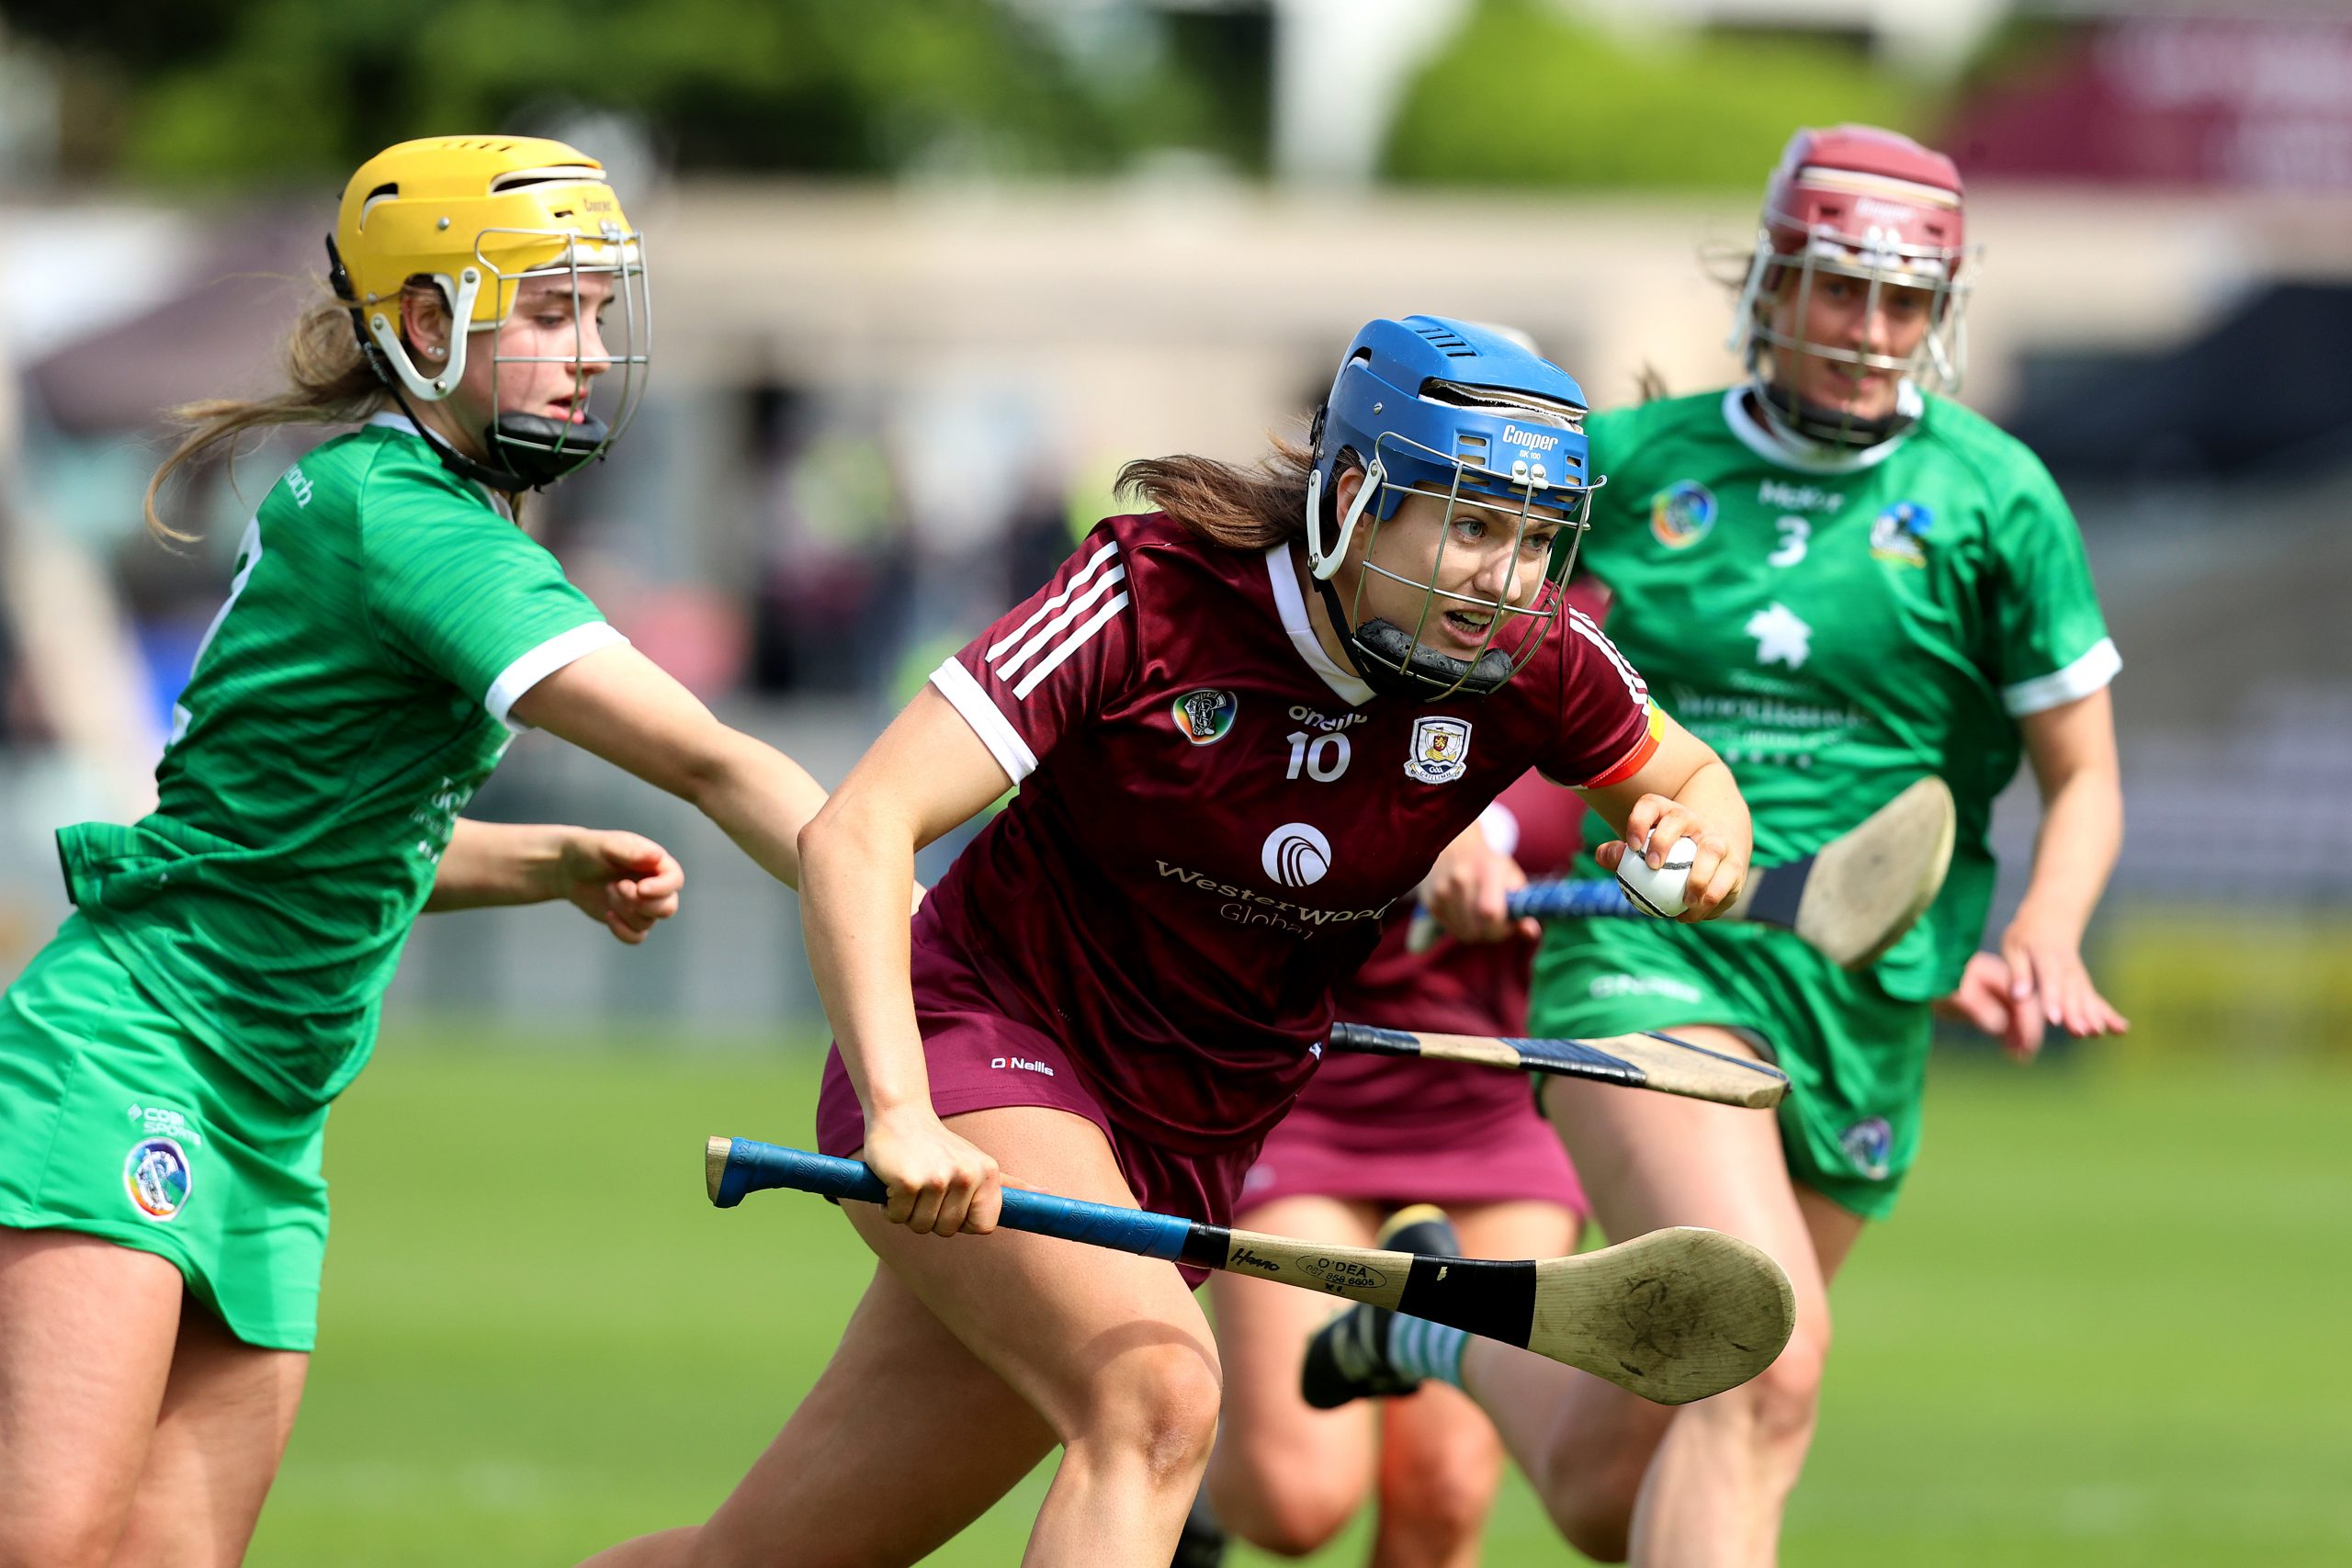 ROUND-UP: Hanniffy hat-trick as Galway get off to stress-free start